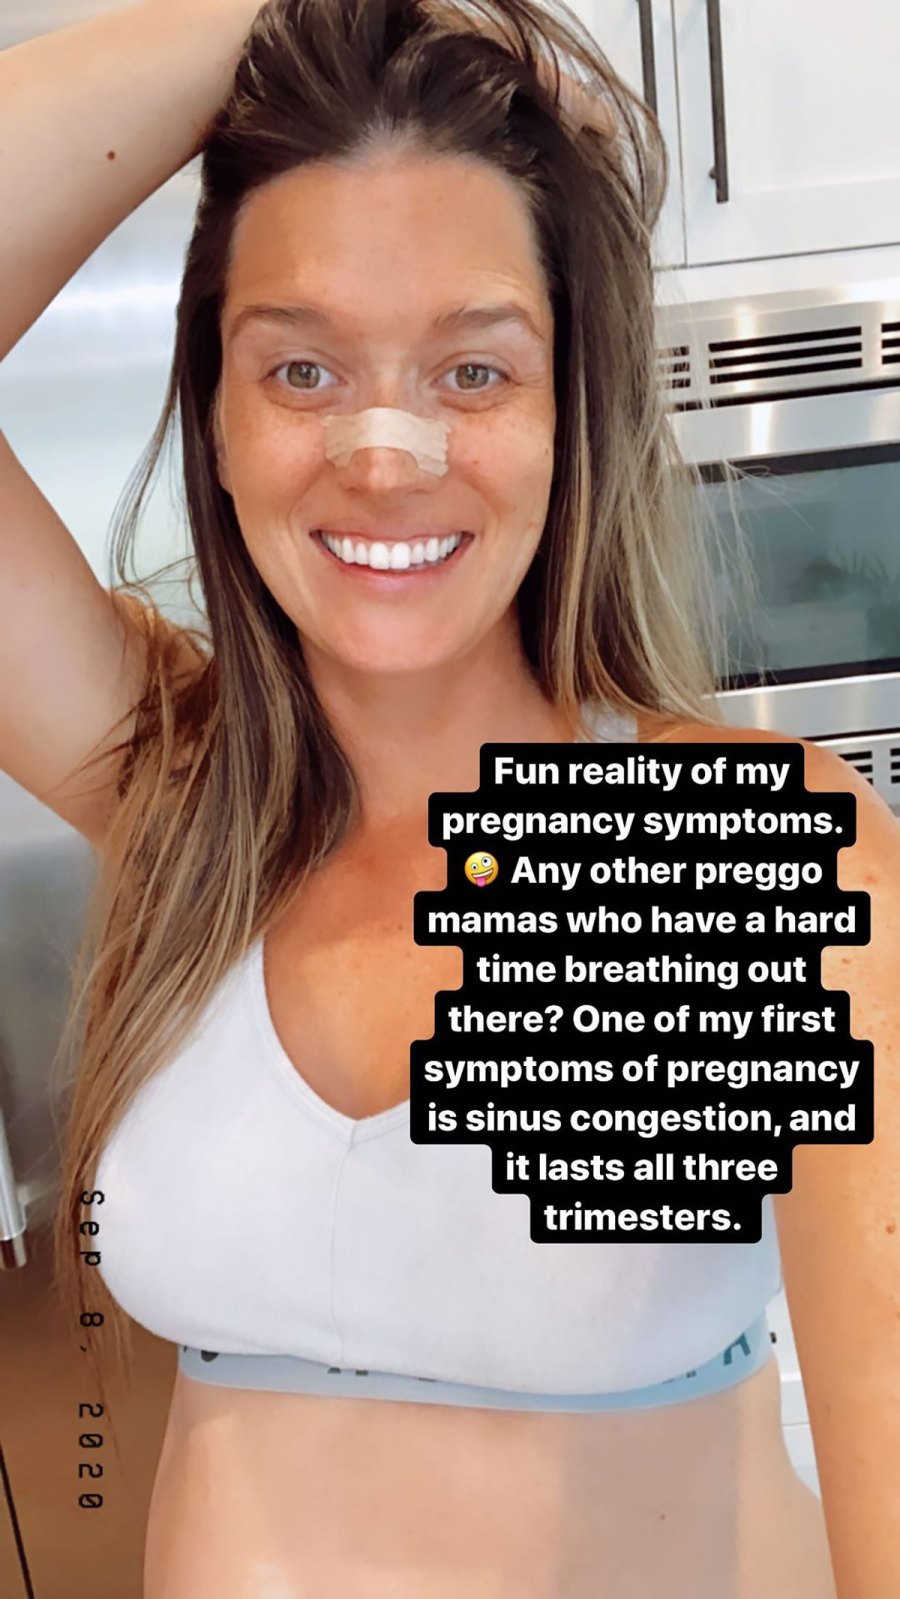 Pregnant Jade Roper Is Having ‘a Hard Time Breathing’ Ahead of 3rd Child